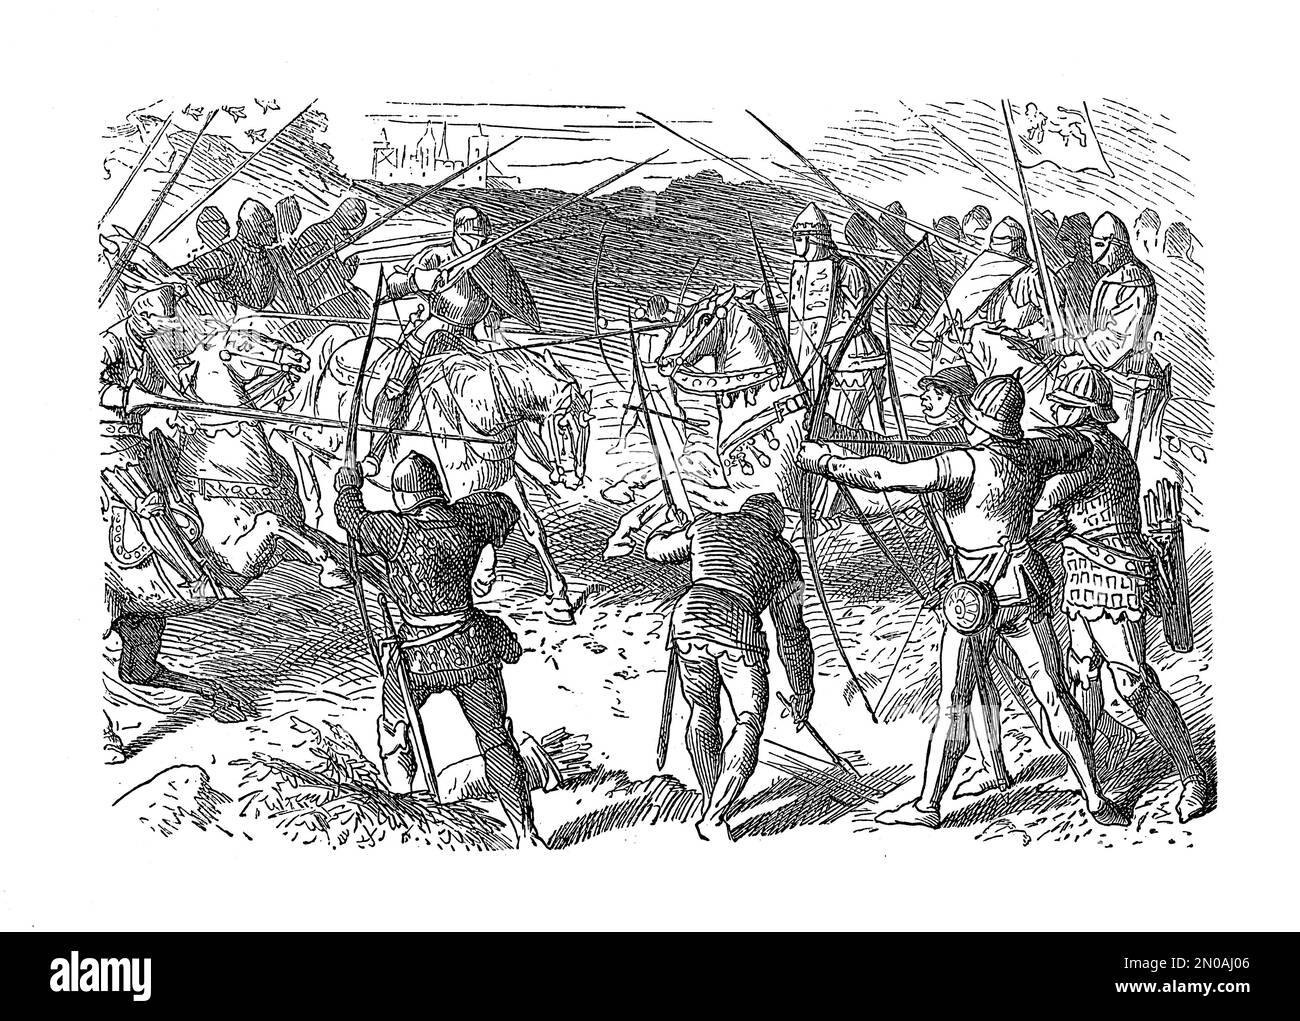 Antique 19th-century engraving of the Battle of Crecy, one of the most important battles of the Hundred Years' War, which took place on 26 August 1346 Stock Photo